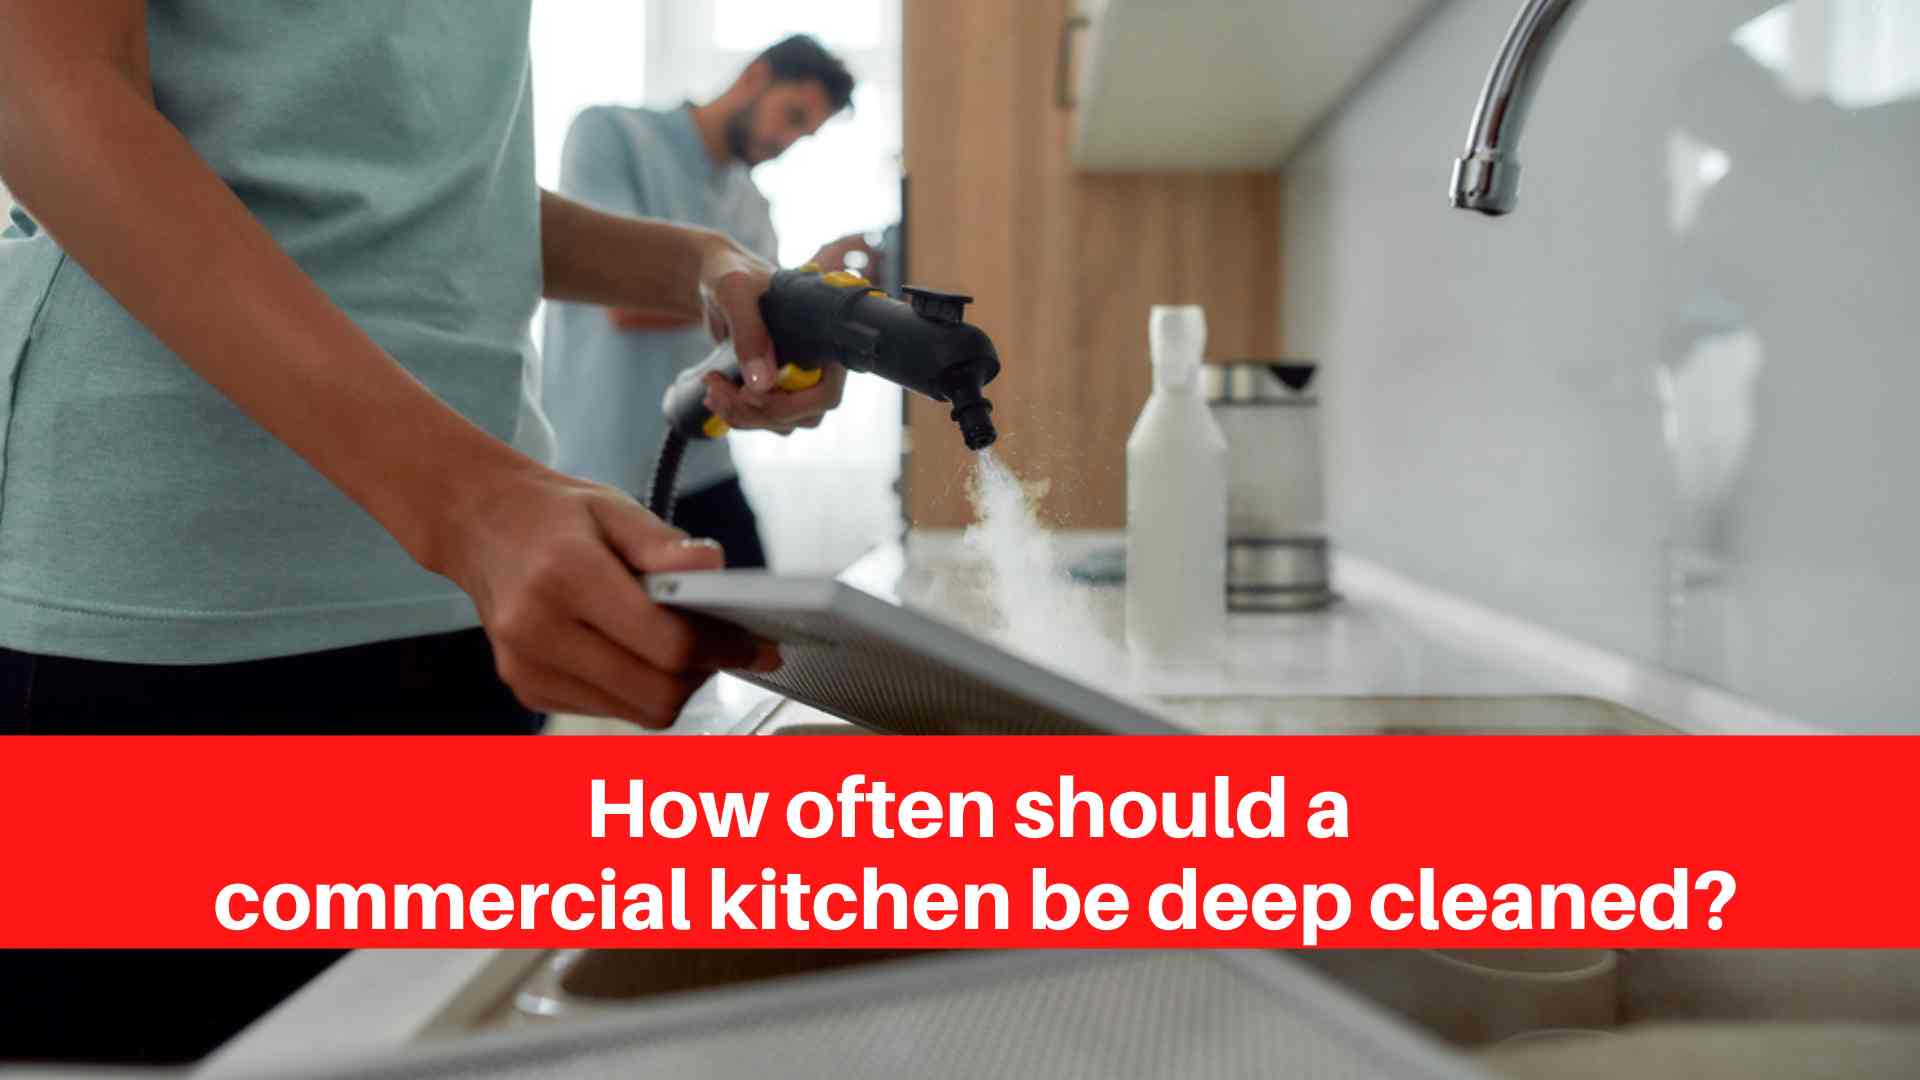 How often should a commercial kitchen be deep cleaned